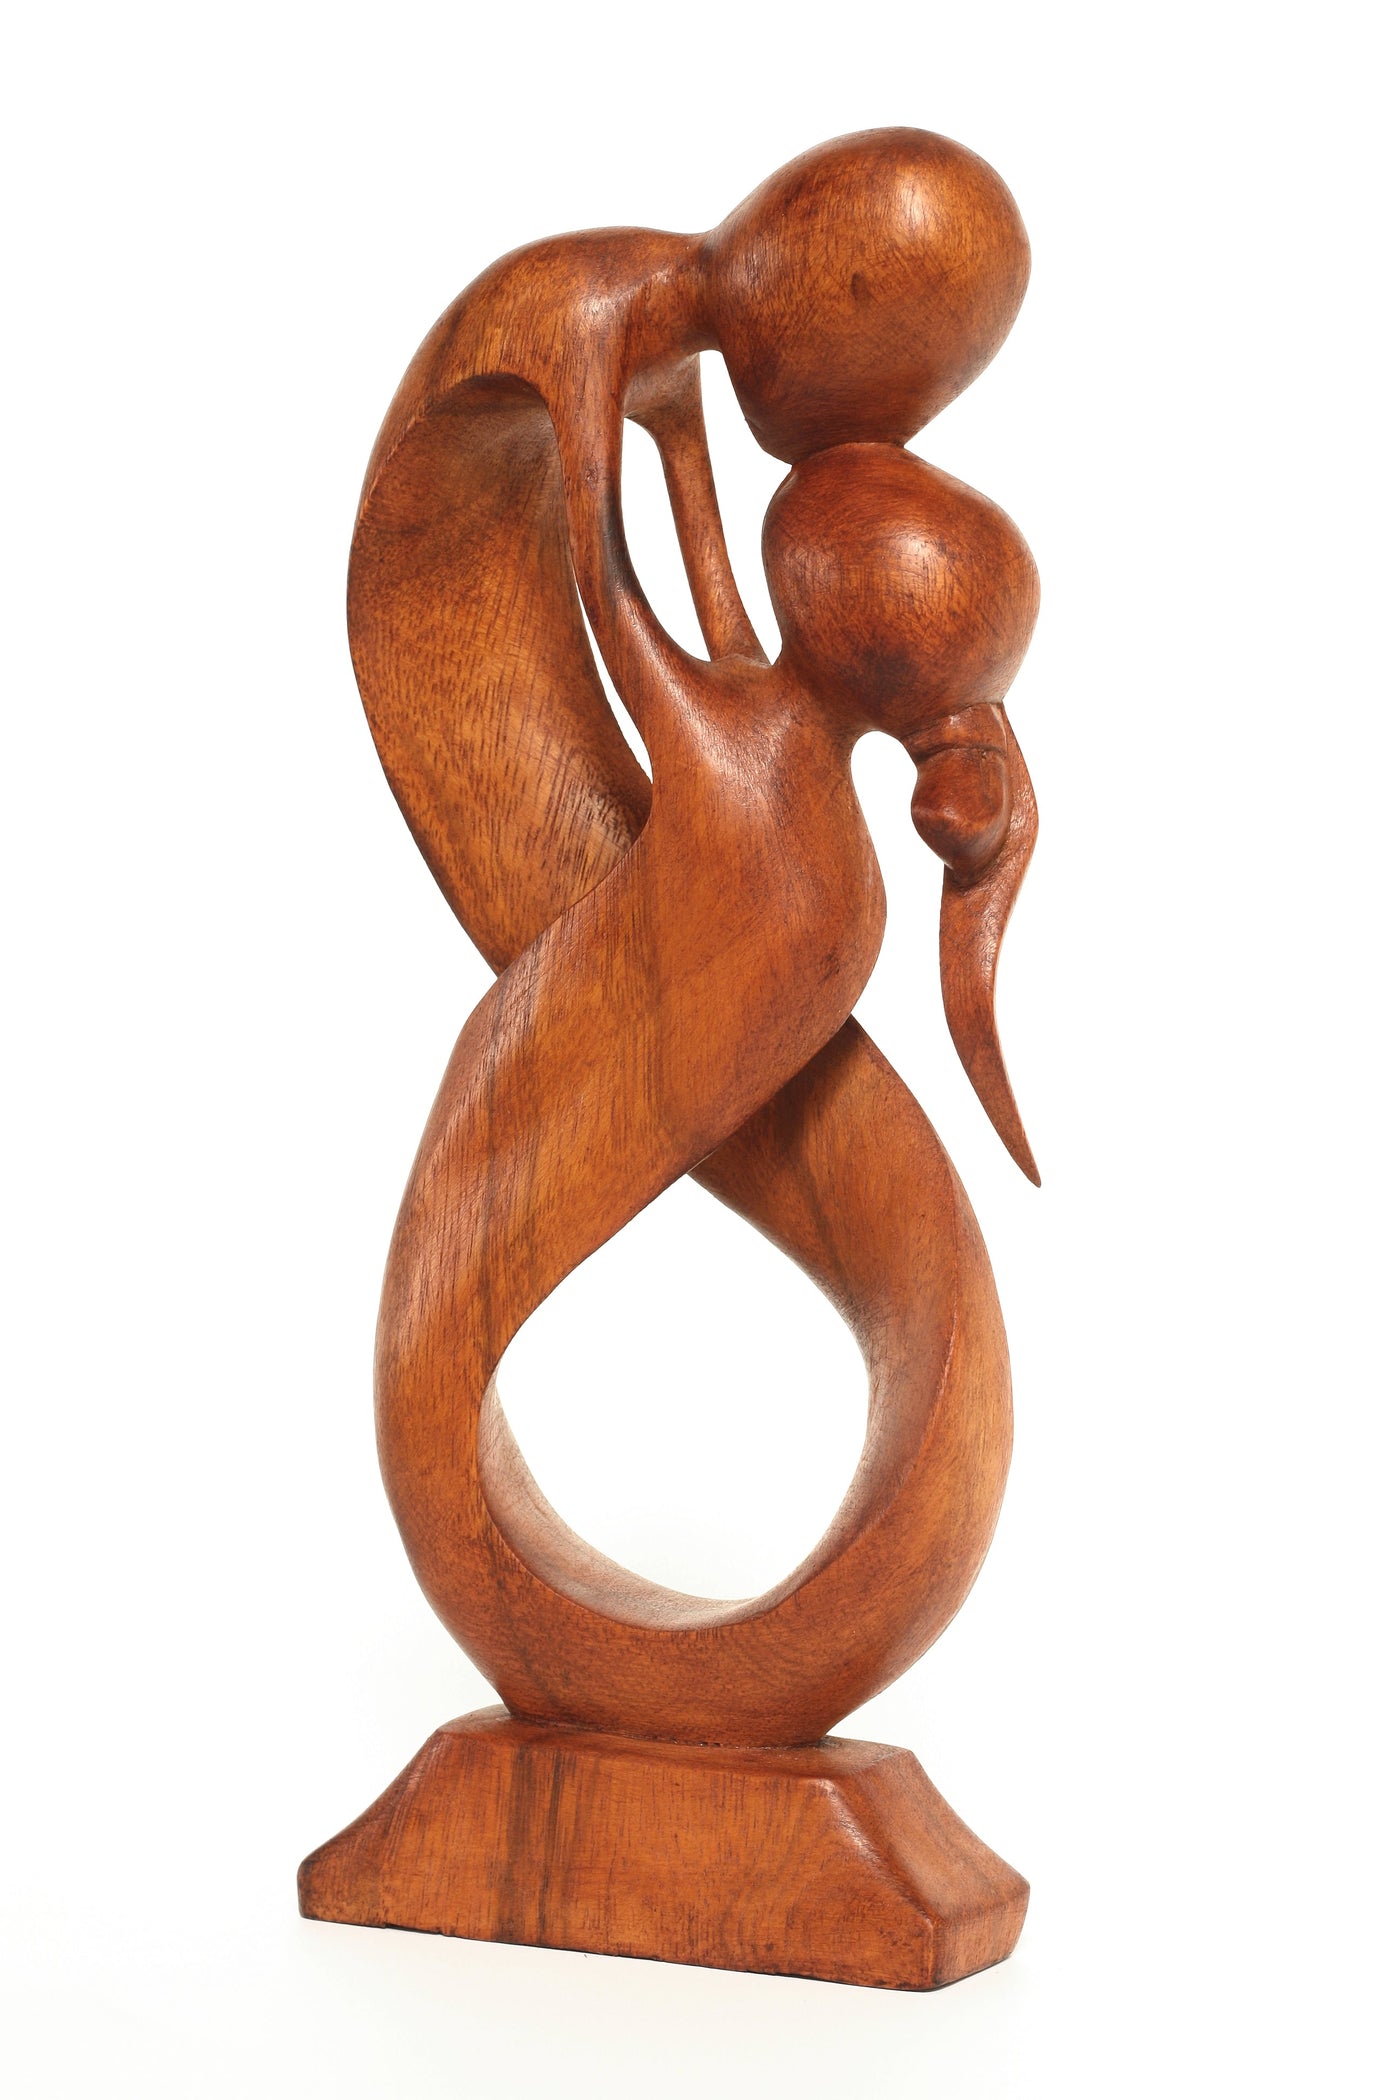 12" Wooden Handmade Abstract Sculpture Statue Handcrafted "Always Yours" Gift Art Decorative Home Decor Figurine Accent Decoration Artwork Hand Carved